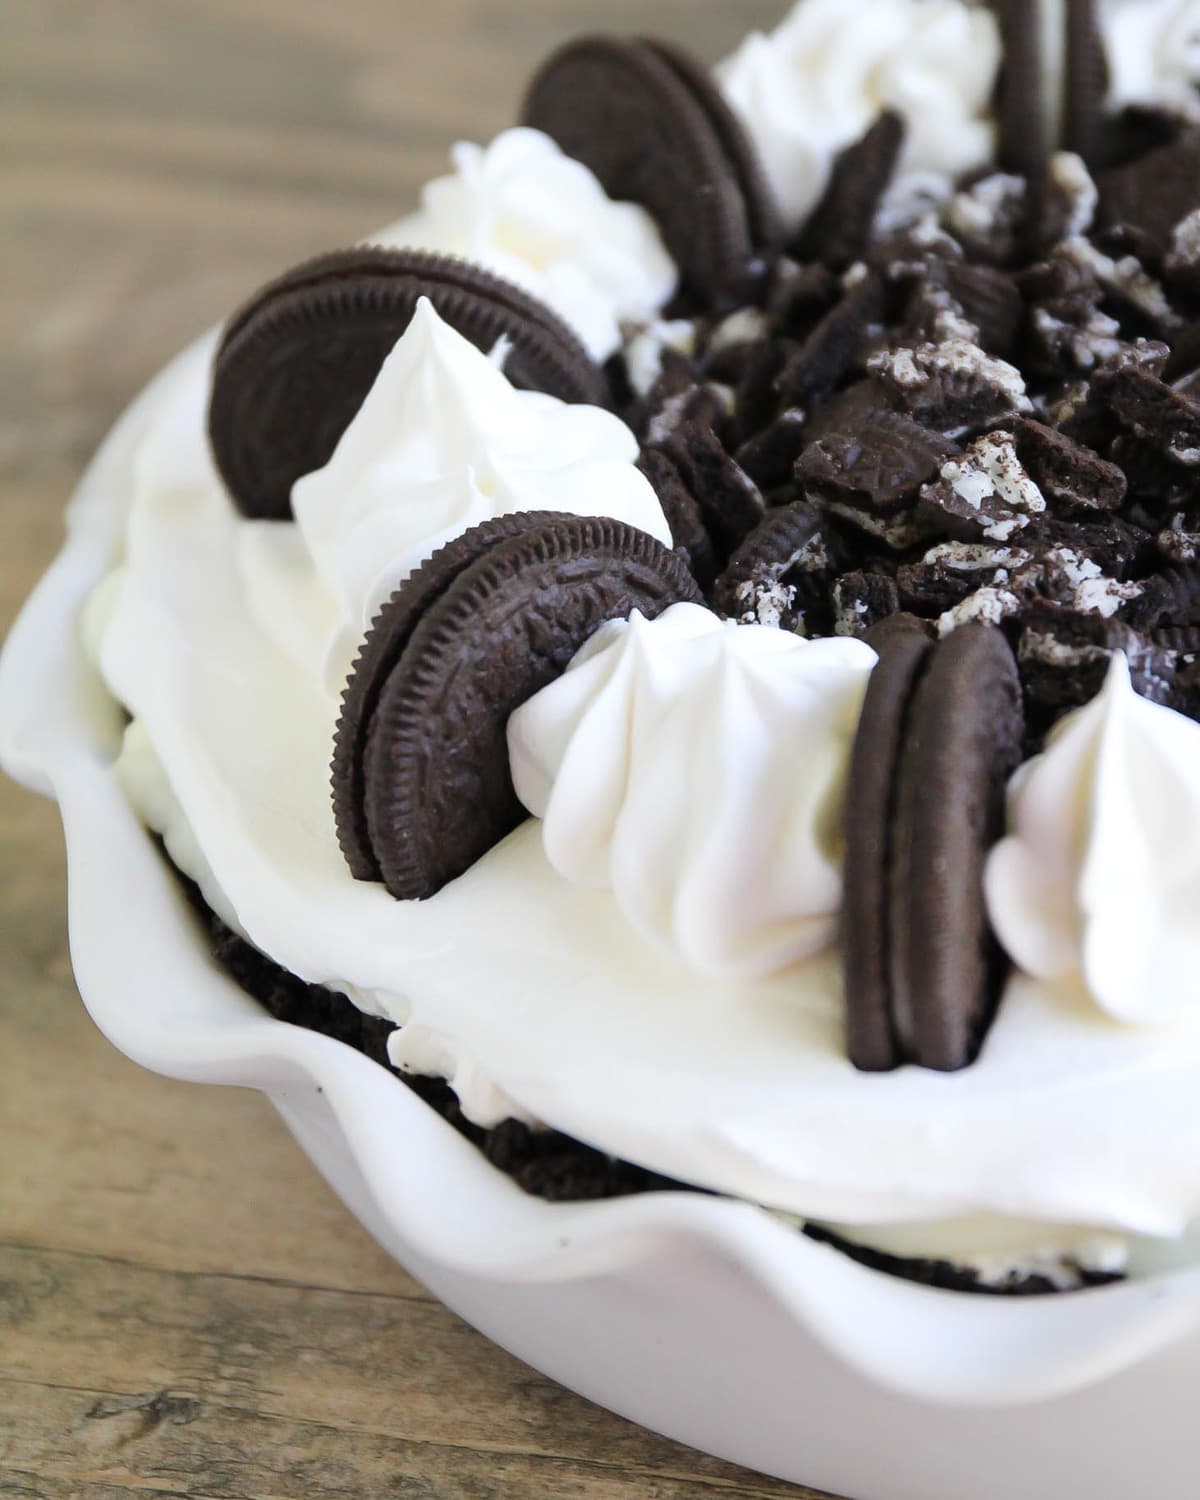 Pudding Pie topped with whole and chopped Oreo